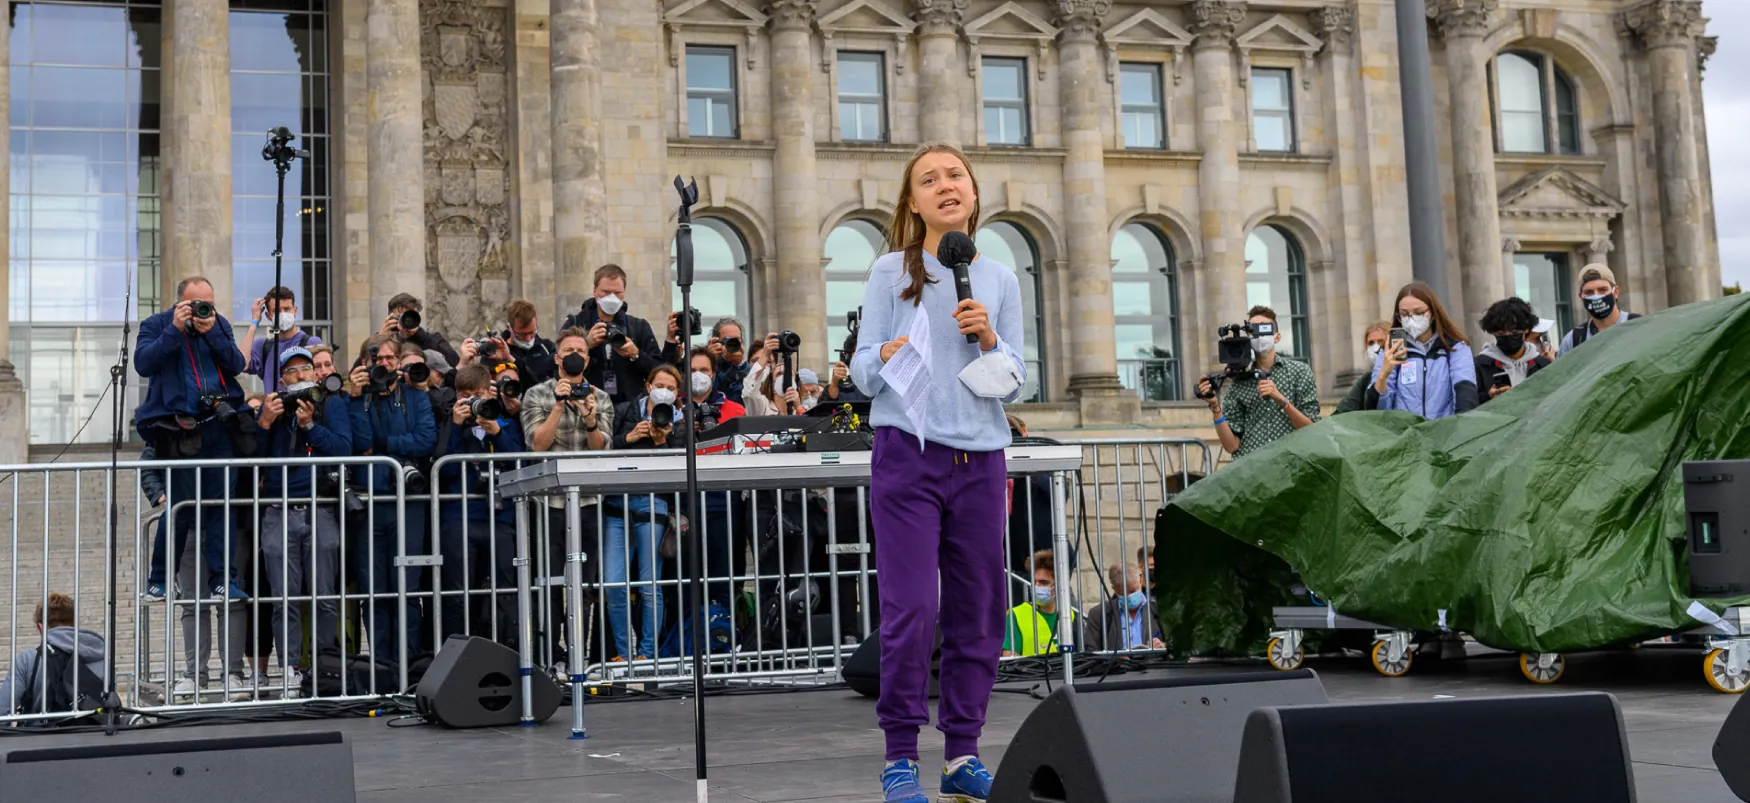 Greta Thunberg addressing a crowd in front of a governmental building with reporters and photographers filming and photographing from behind the stage.